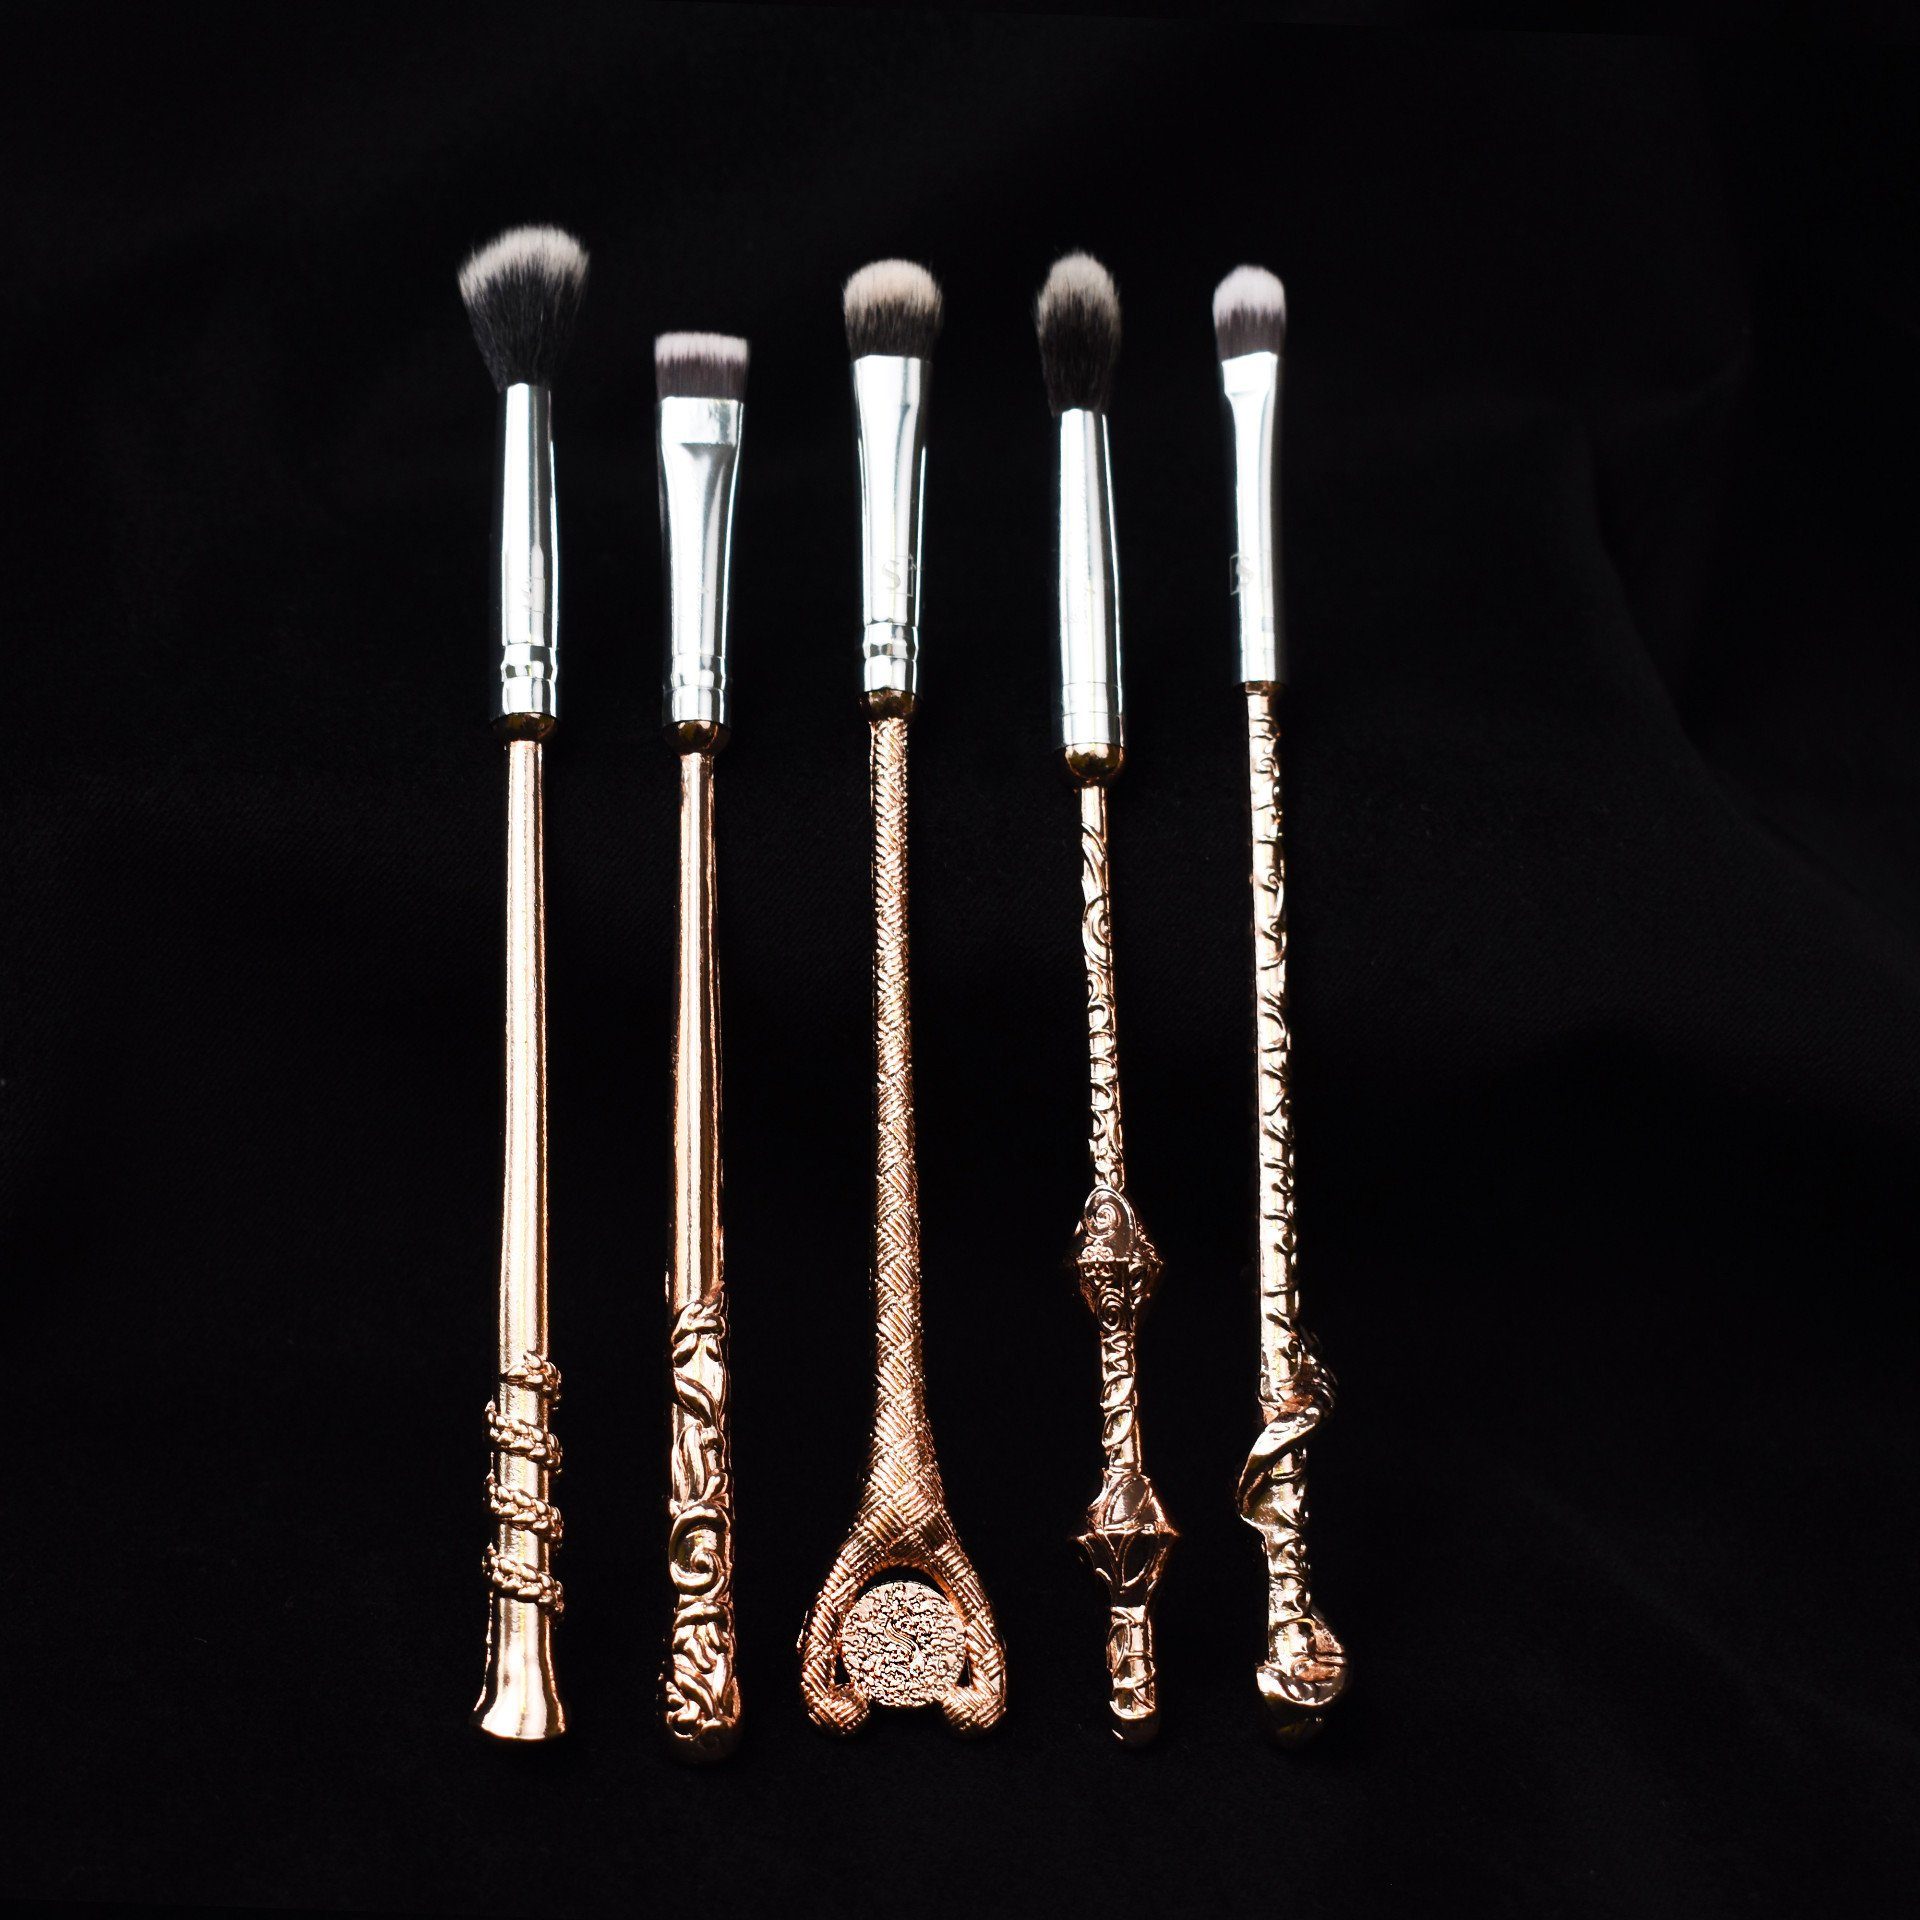 Storybook Cosmetics 5 piece rose gold wizard's wands brush set (USD 55) from storybookcosmetics.com 